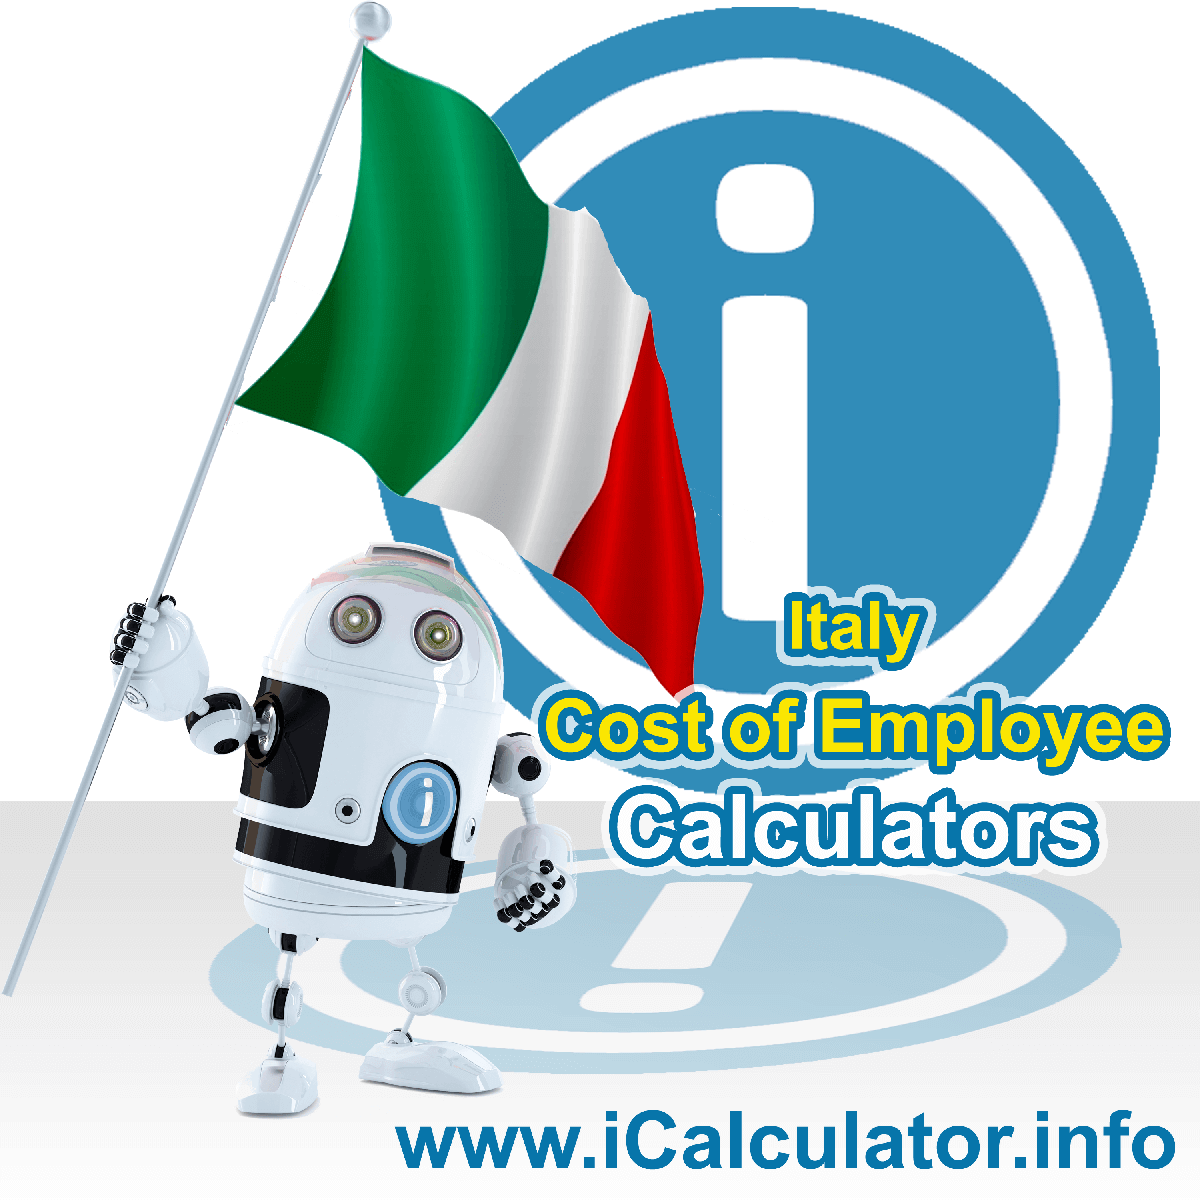 Italy Payroll Calculator. This image shows a new employer in Italy looking at payroll and human resource services in Italy as they want to hire an employee in Italy but are not sure of the employment costs. So, they make use of the Italy payroll calculator to understand their employment cost in Italy in 2020